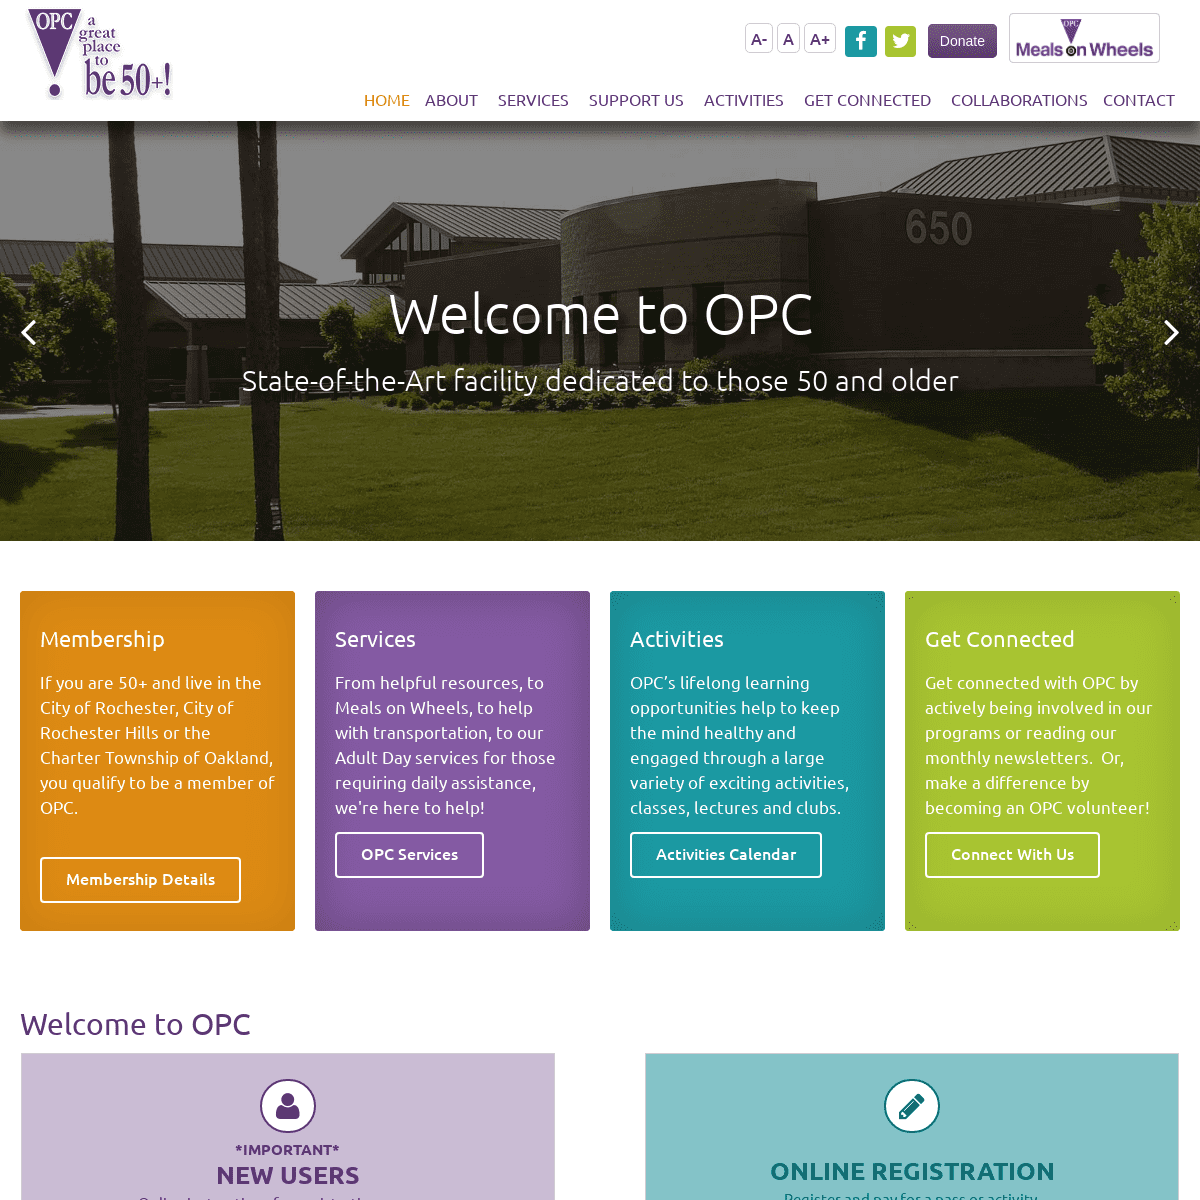 A complete backup of opcseniorcenter.org